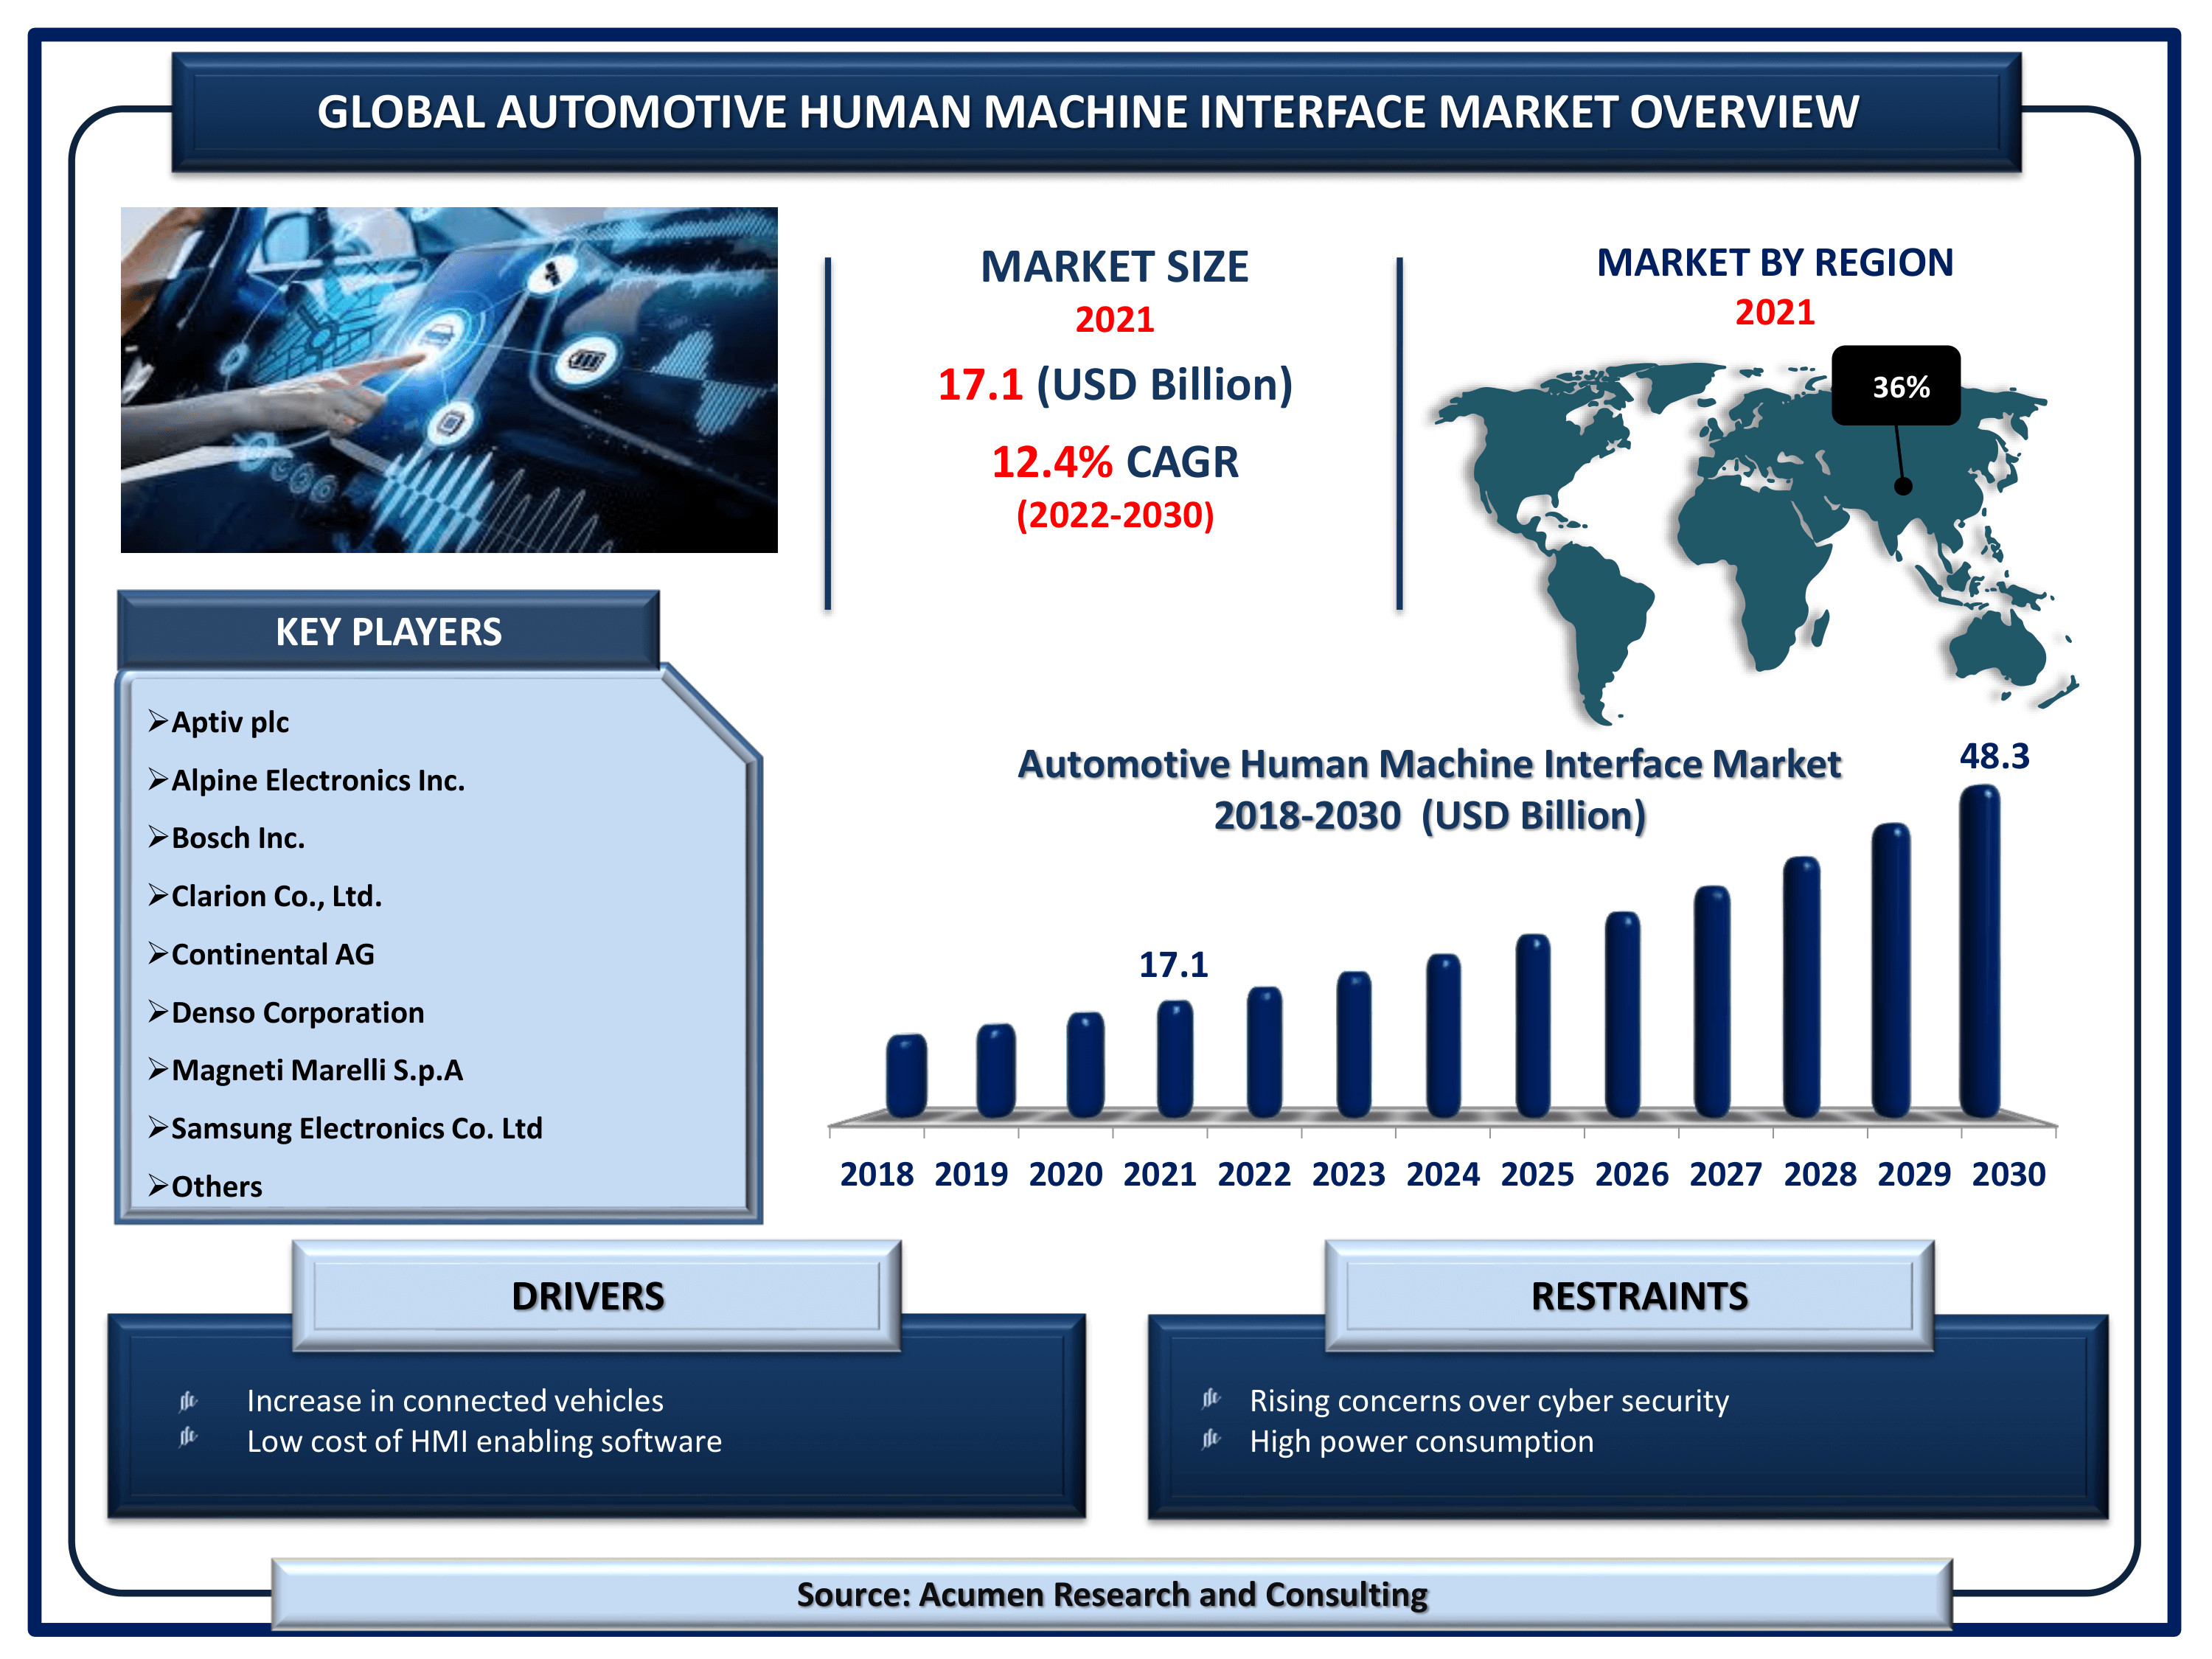 Global automotive human machine interface market revenue is estimated to reach USD 48.3 Billion by 2030 with a CAGR of 12.4% from 2022 to 2030